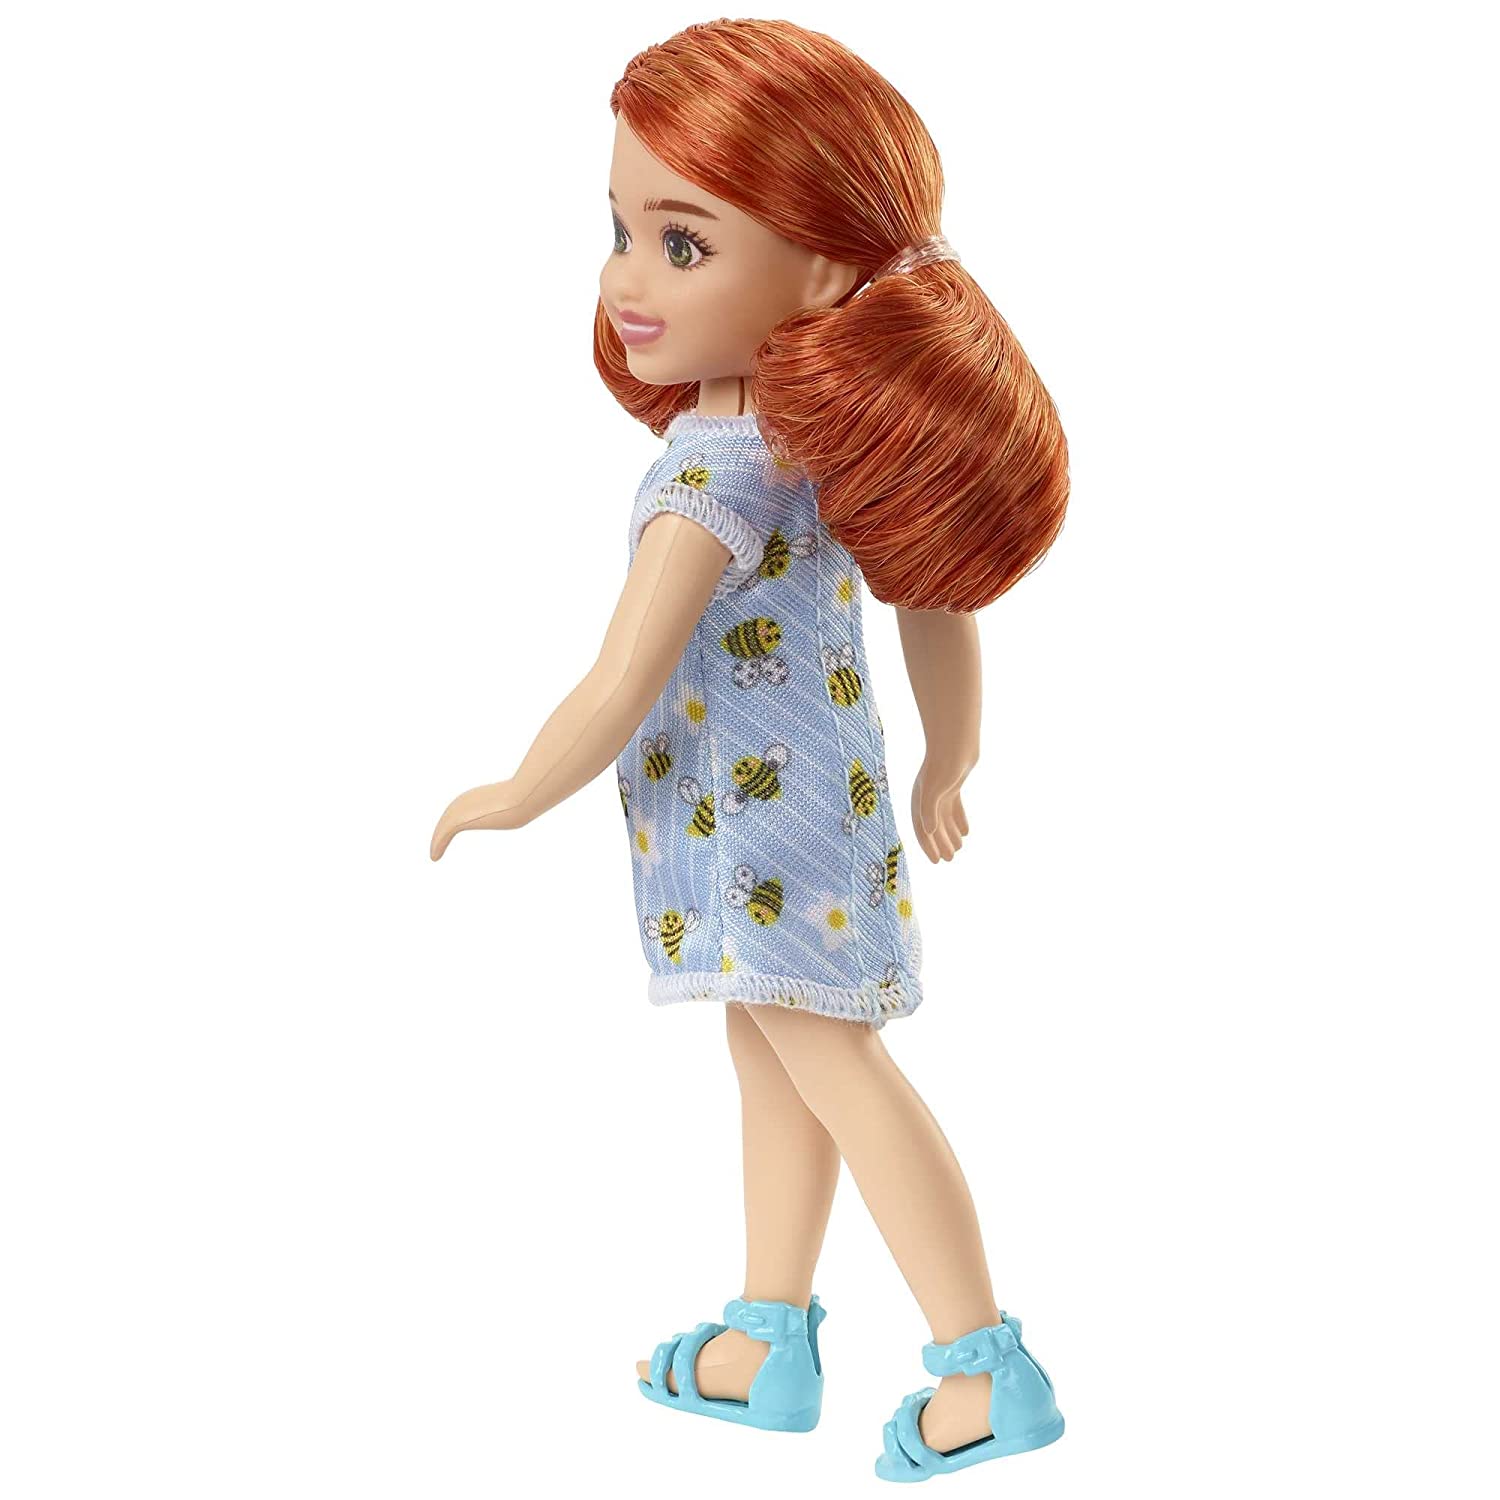 Barbie Chelsea 6 Inch Doll Red Hair Wearing Bumblebee & Flower-Print Dress and Blue Sandals for Kids Ages 3 Years Old & Up